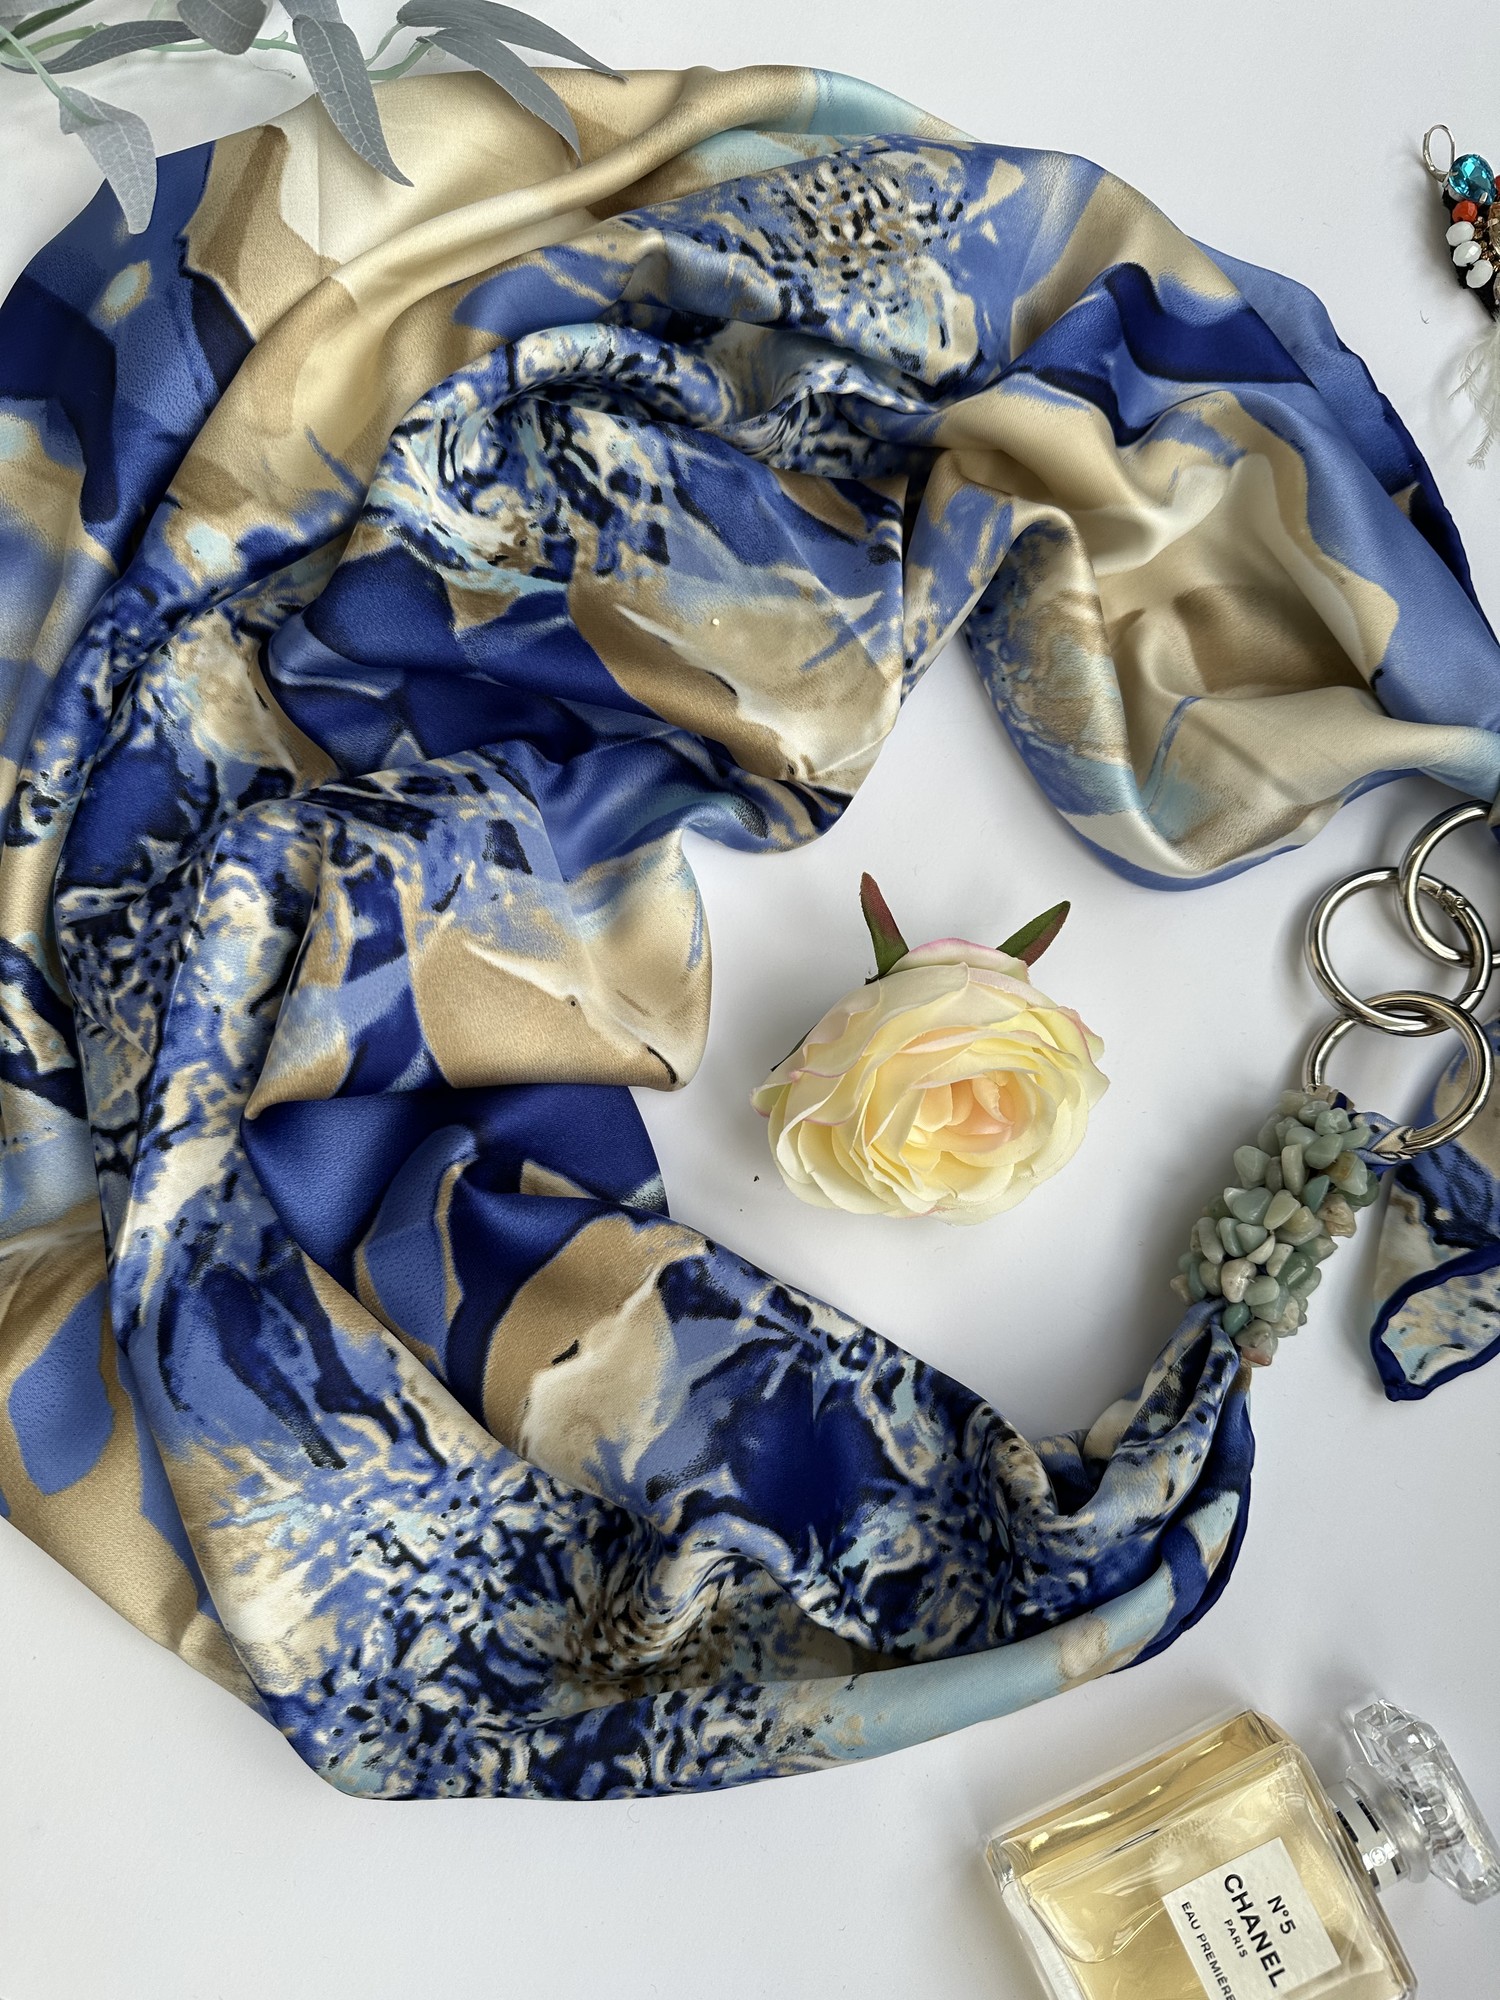 Silk scarf My Scarf "Ukraine  spring" luxurious print. Decorated with natural t agat  stone